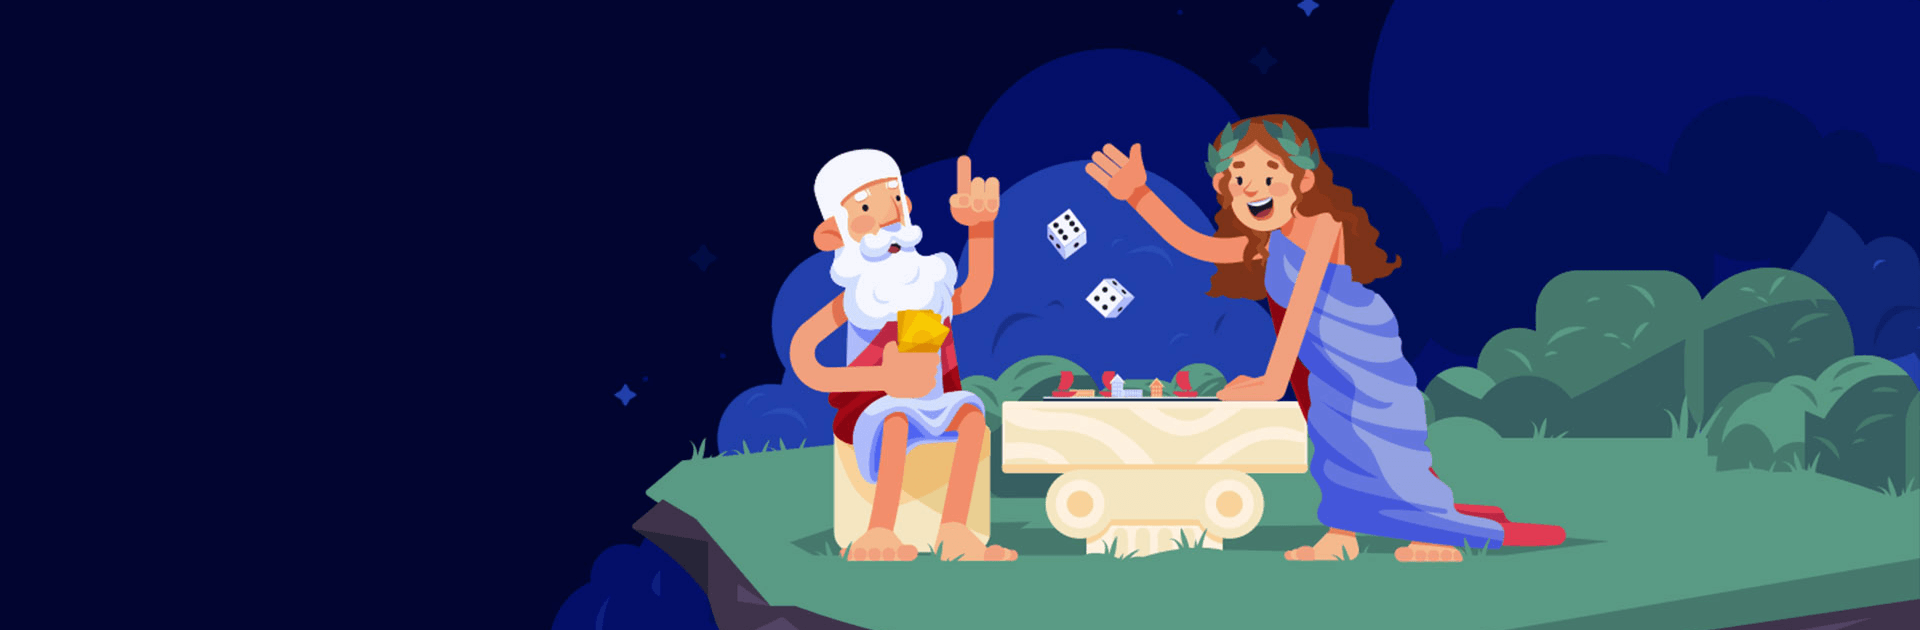 Plato – Games & Group Chats